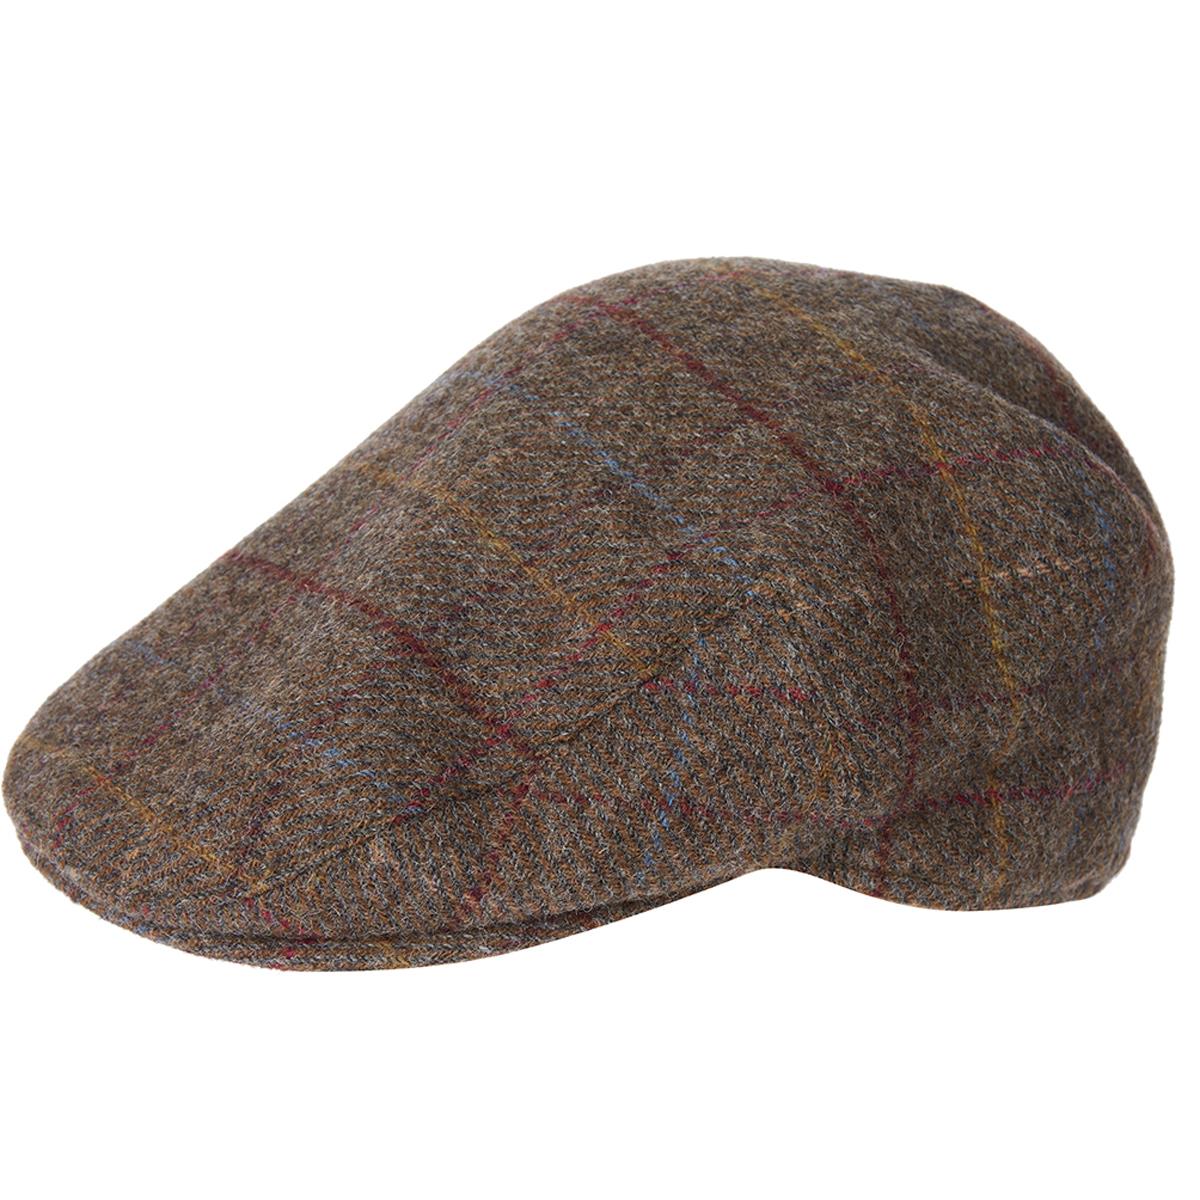 Barbour Unisex Crieff Flat Cap Olive/Blue/Red 7 3/8